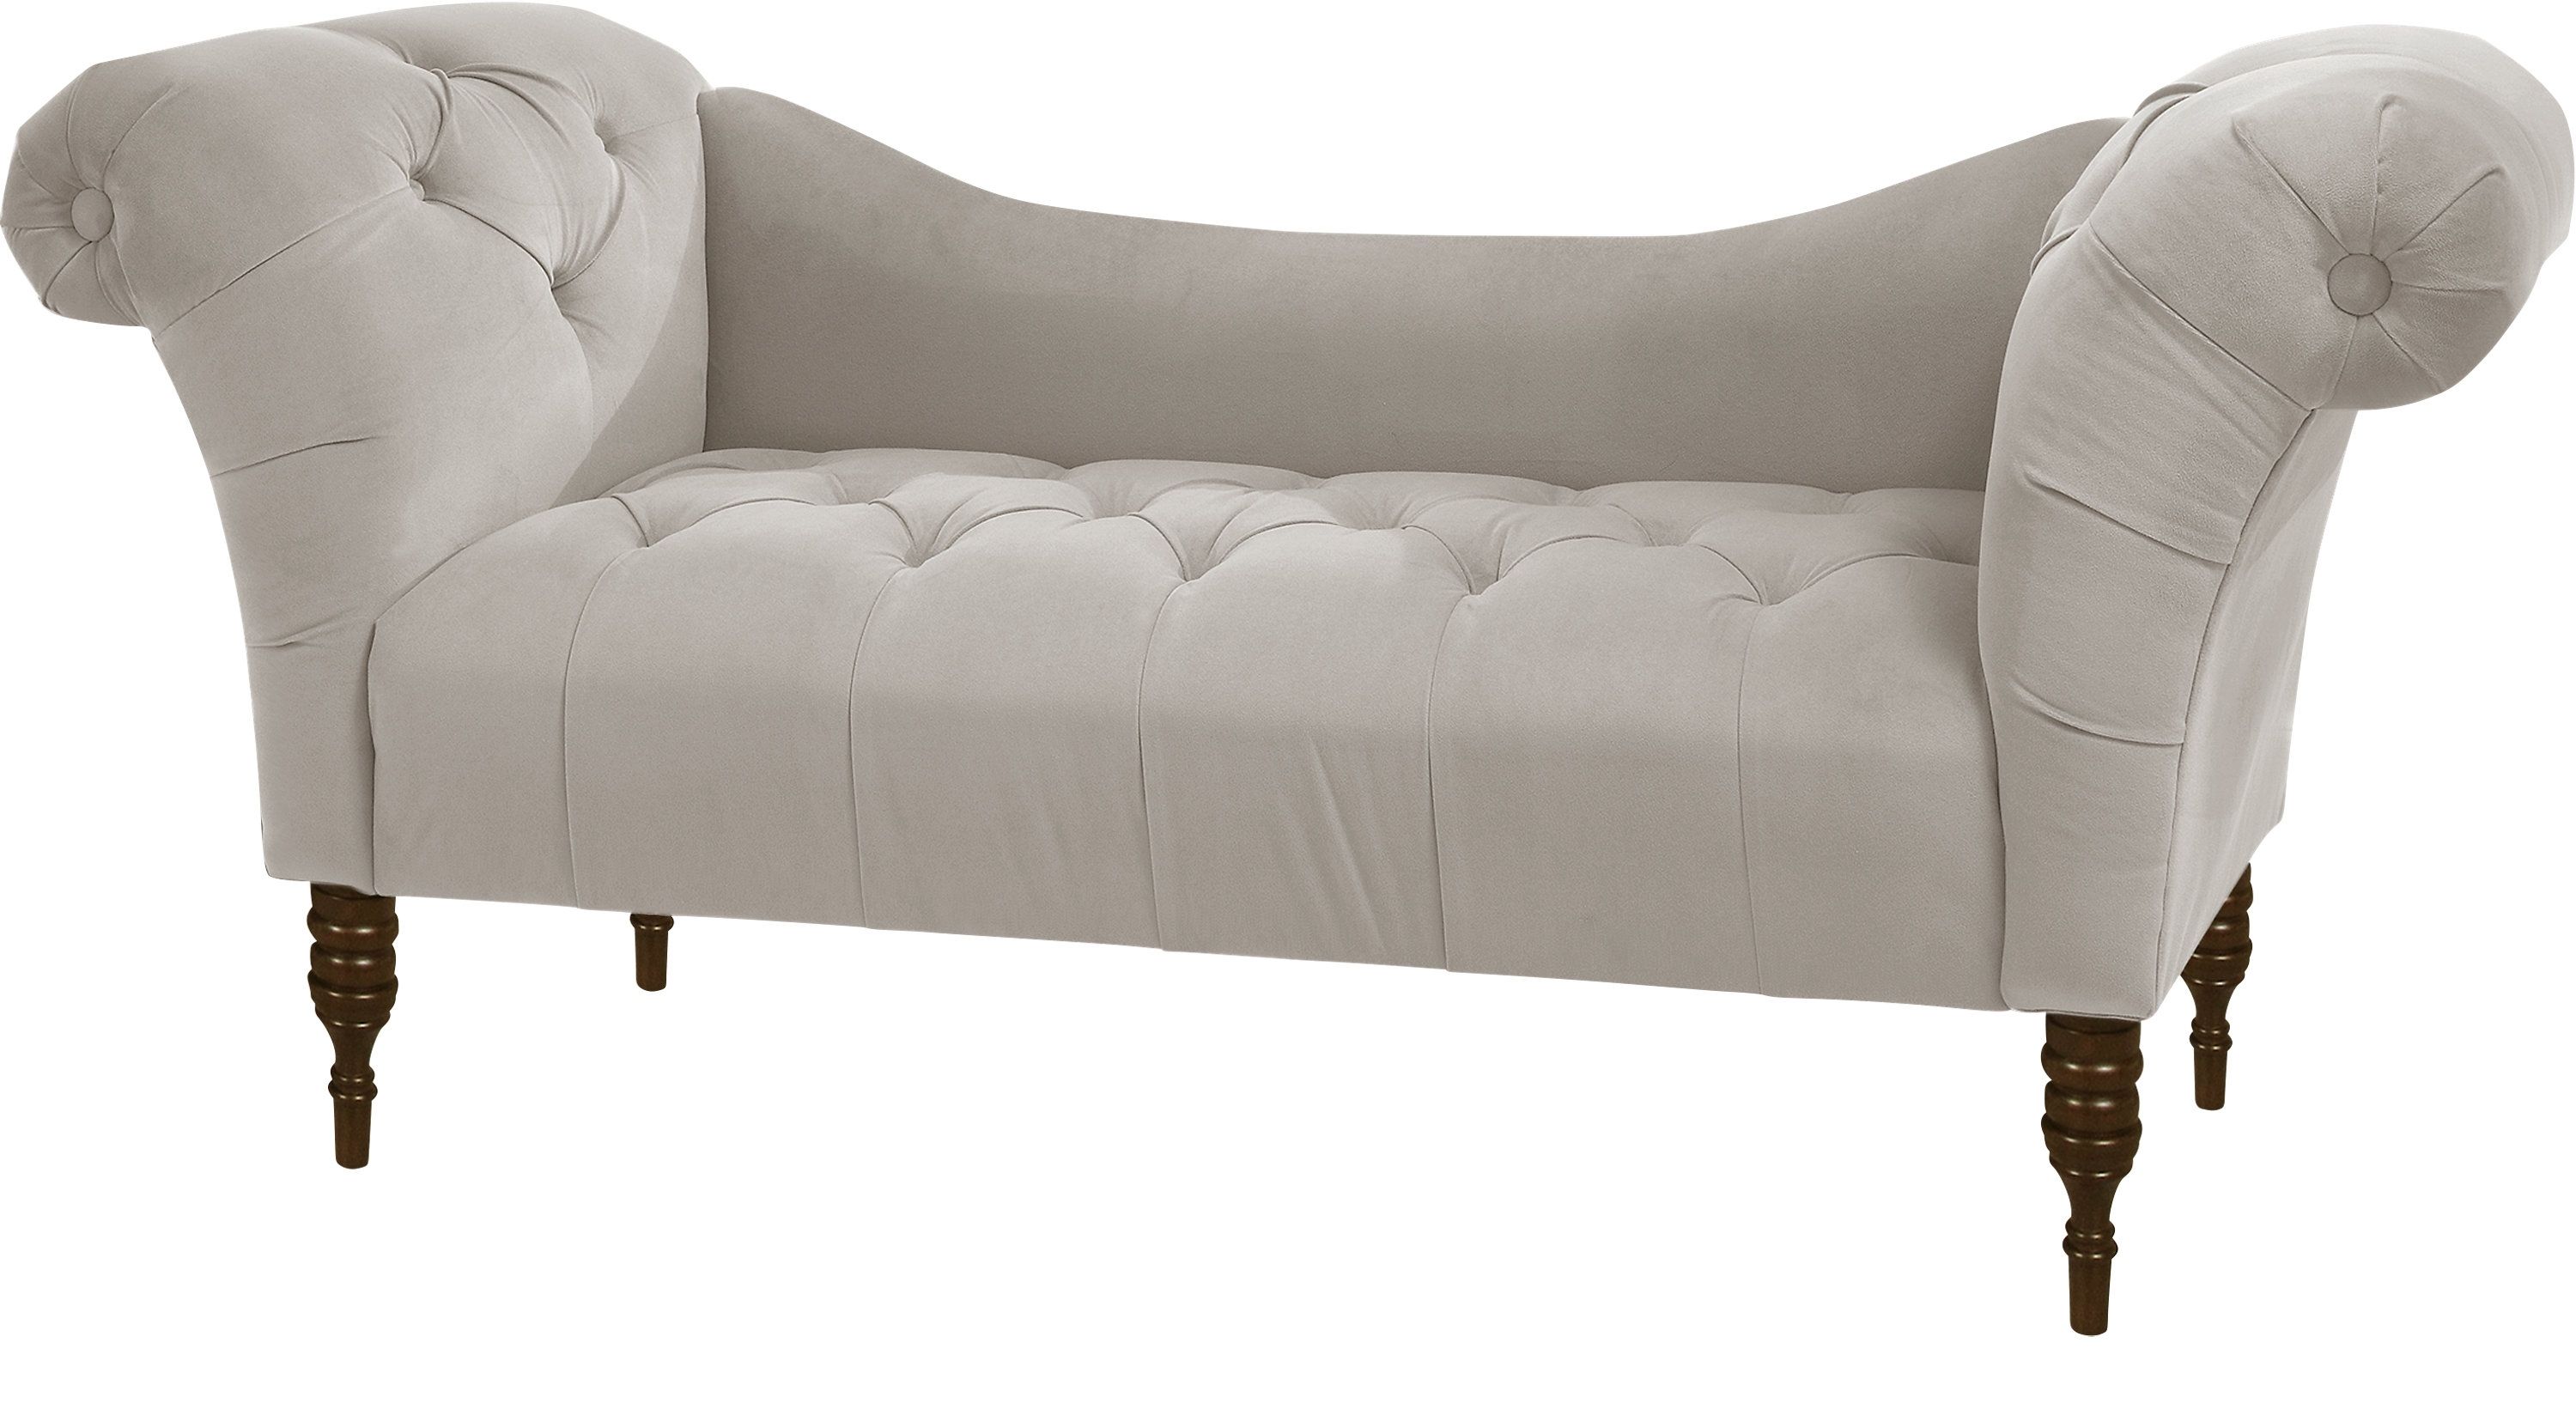 Chaise Benchs Within Most Up To Date Whitmere Light Gray Chaise Bench – Transitional (Photo 1 of 15)